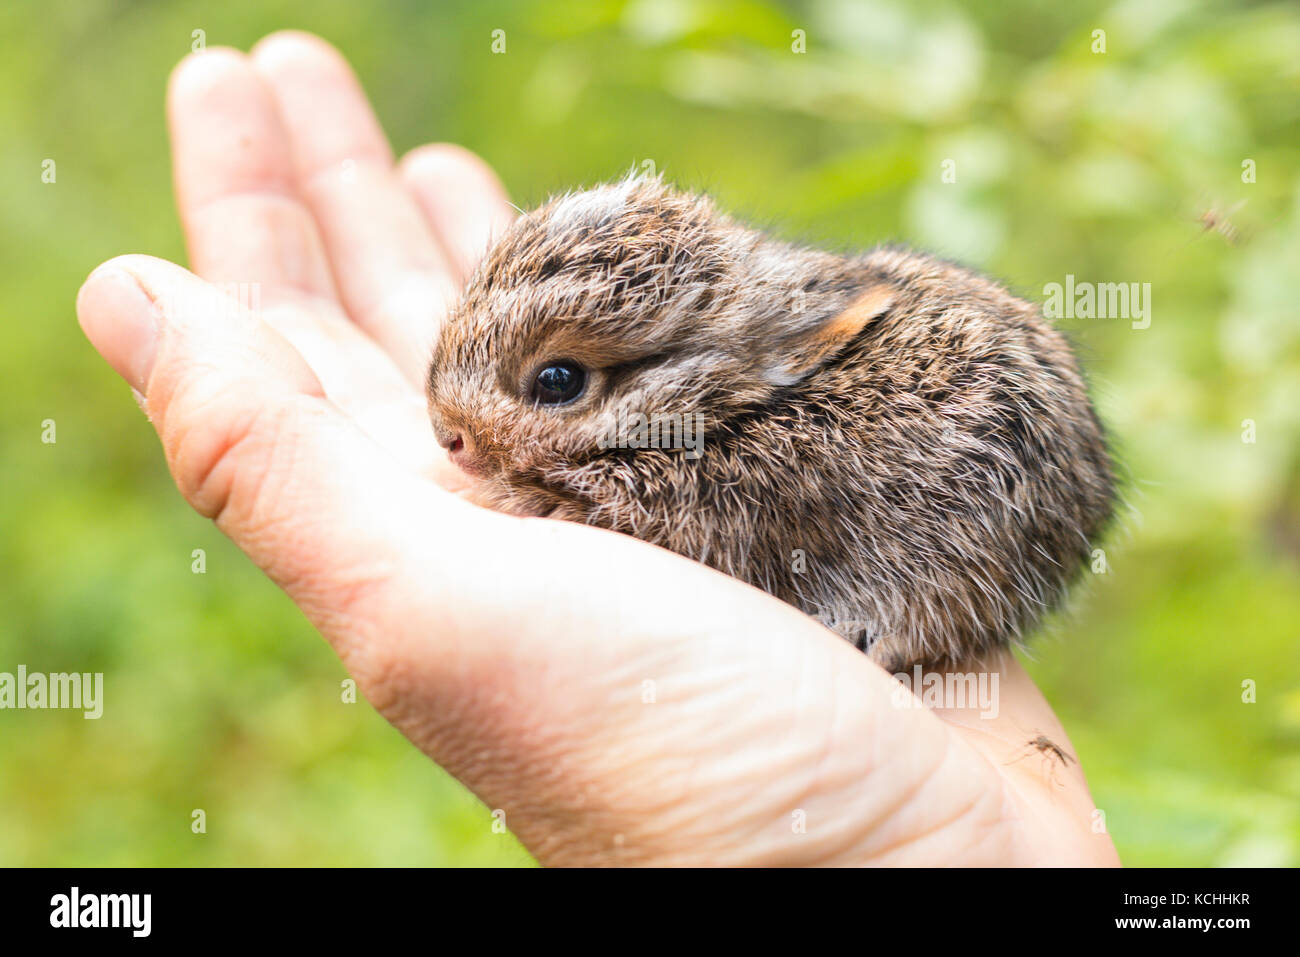 A baby snowshoe hare (Lepus americanus) in the hand Stock Photo